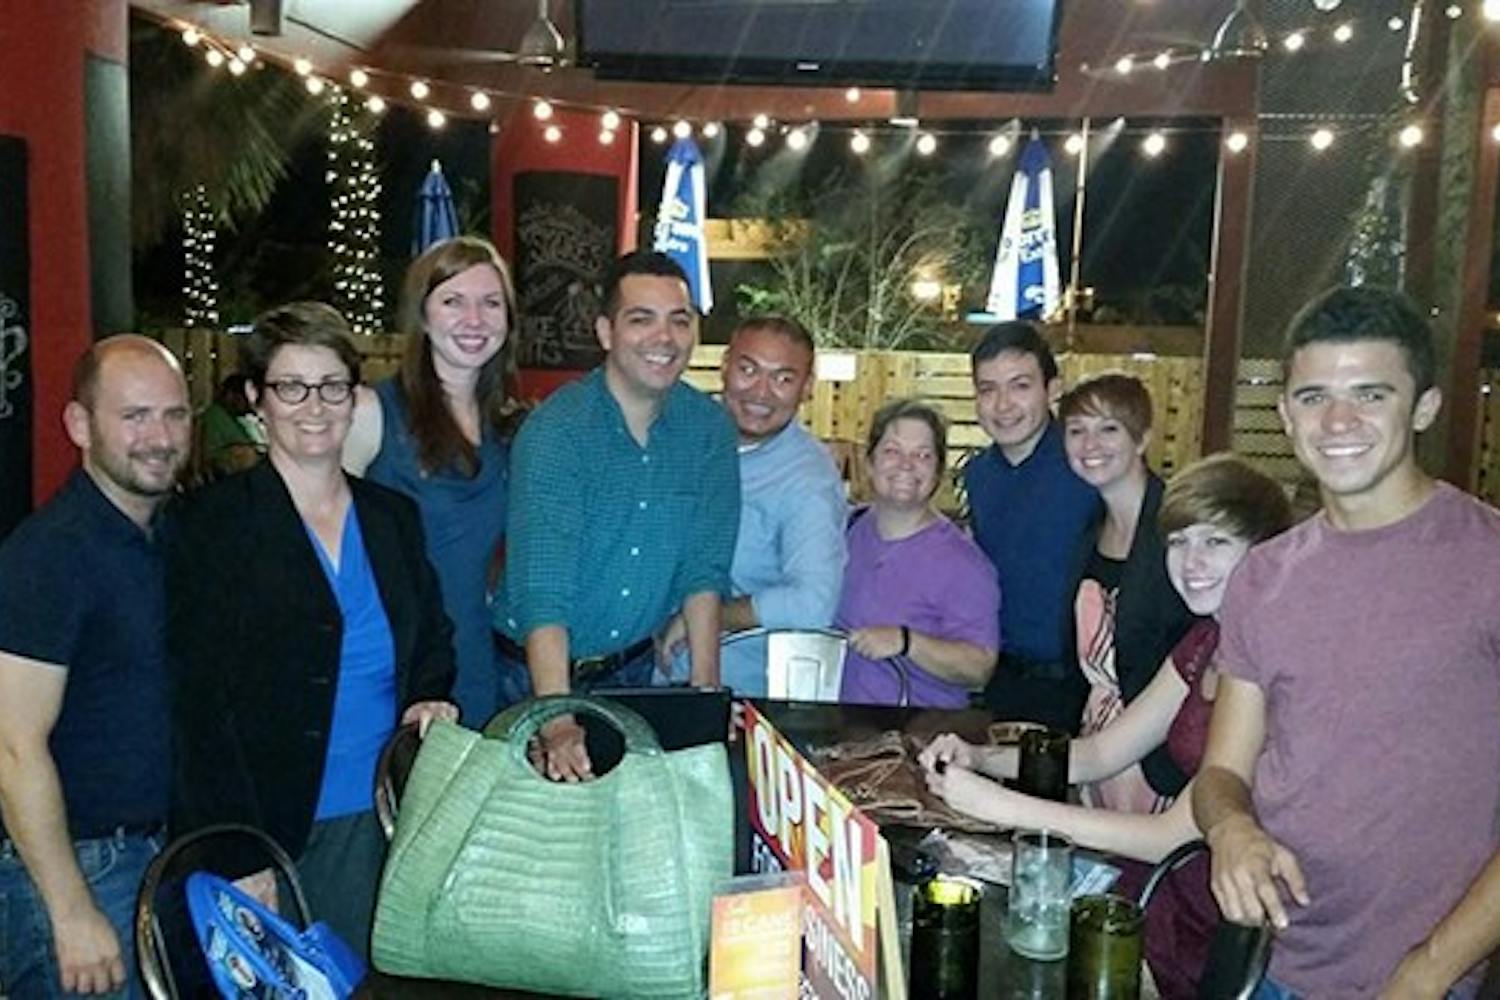 A group of supporters of Prop 475 gather at Salut Kitchen Bar for a post-election party. (Photo Courtesy of Sheila Kloefkorn)